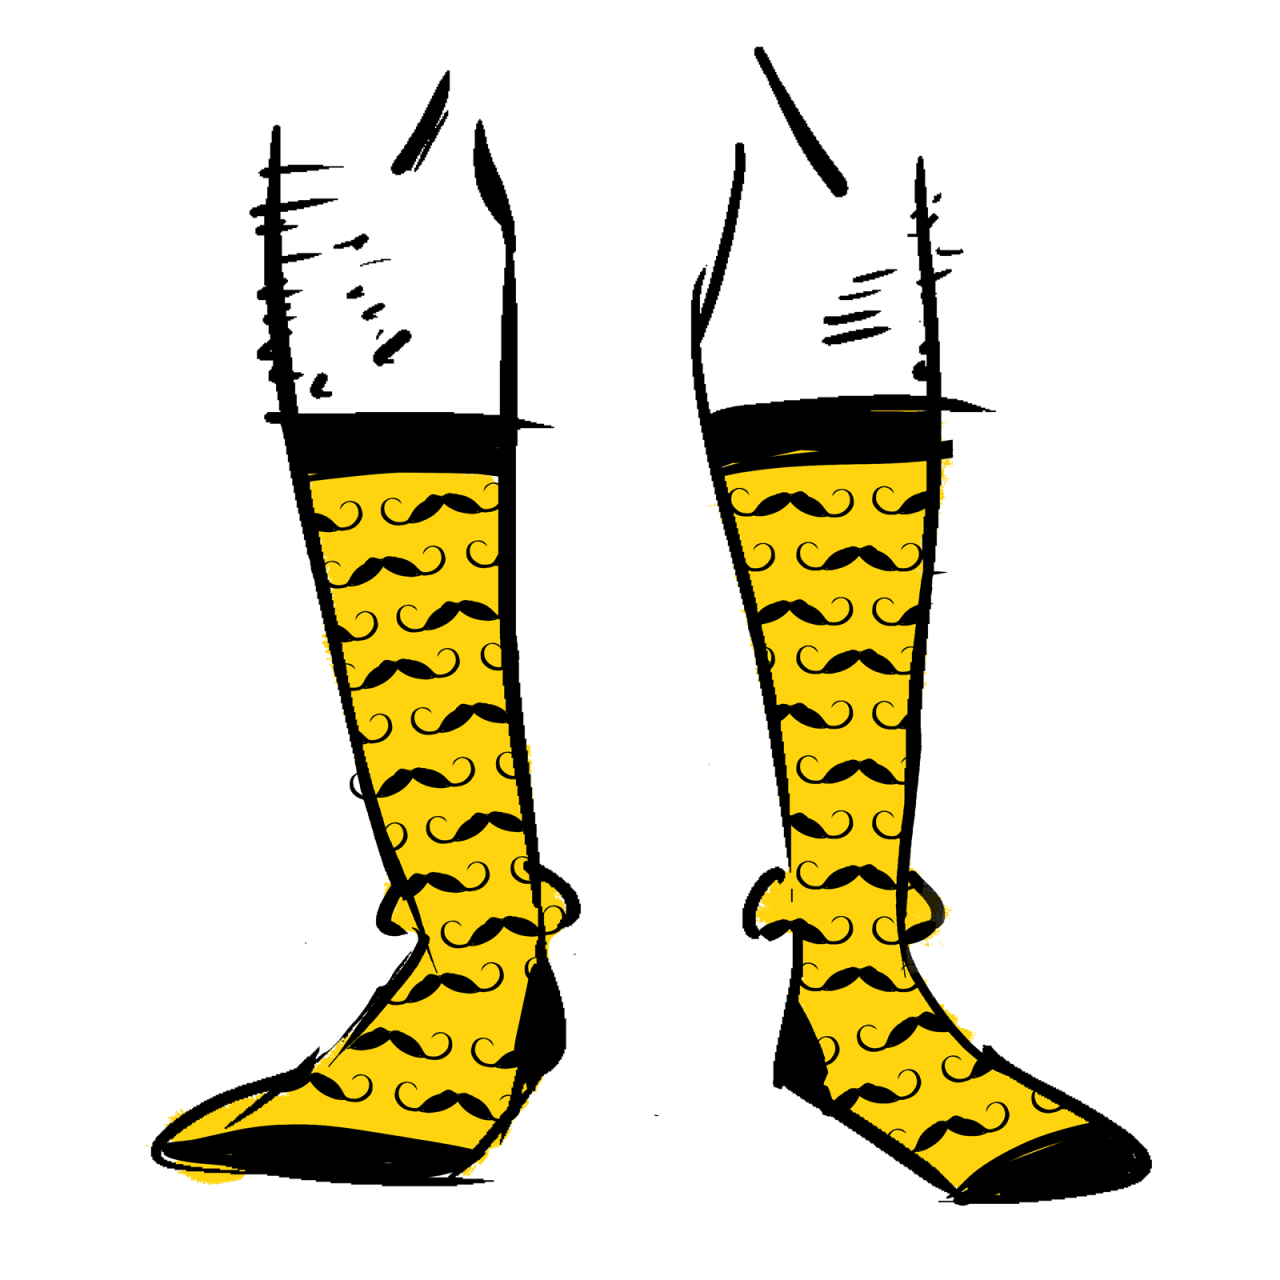 Yellow socks with a pattern of curled "Dali style" mustaches on them